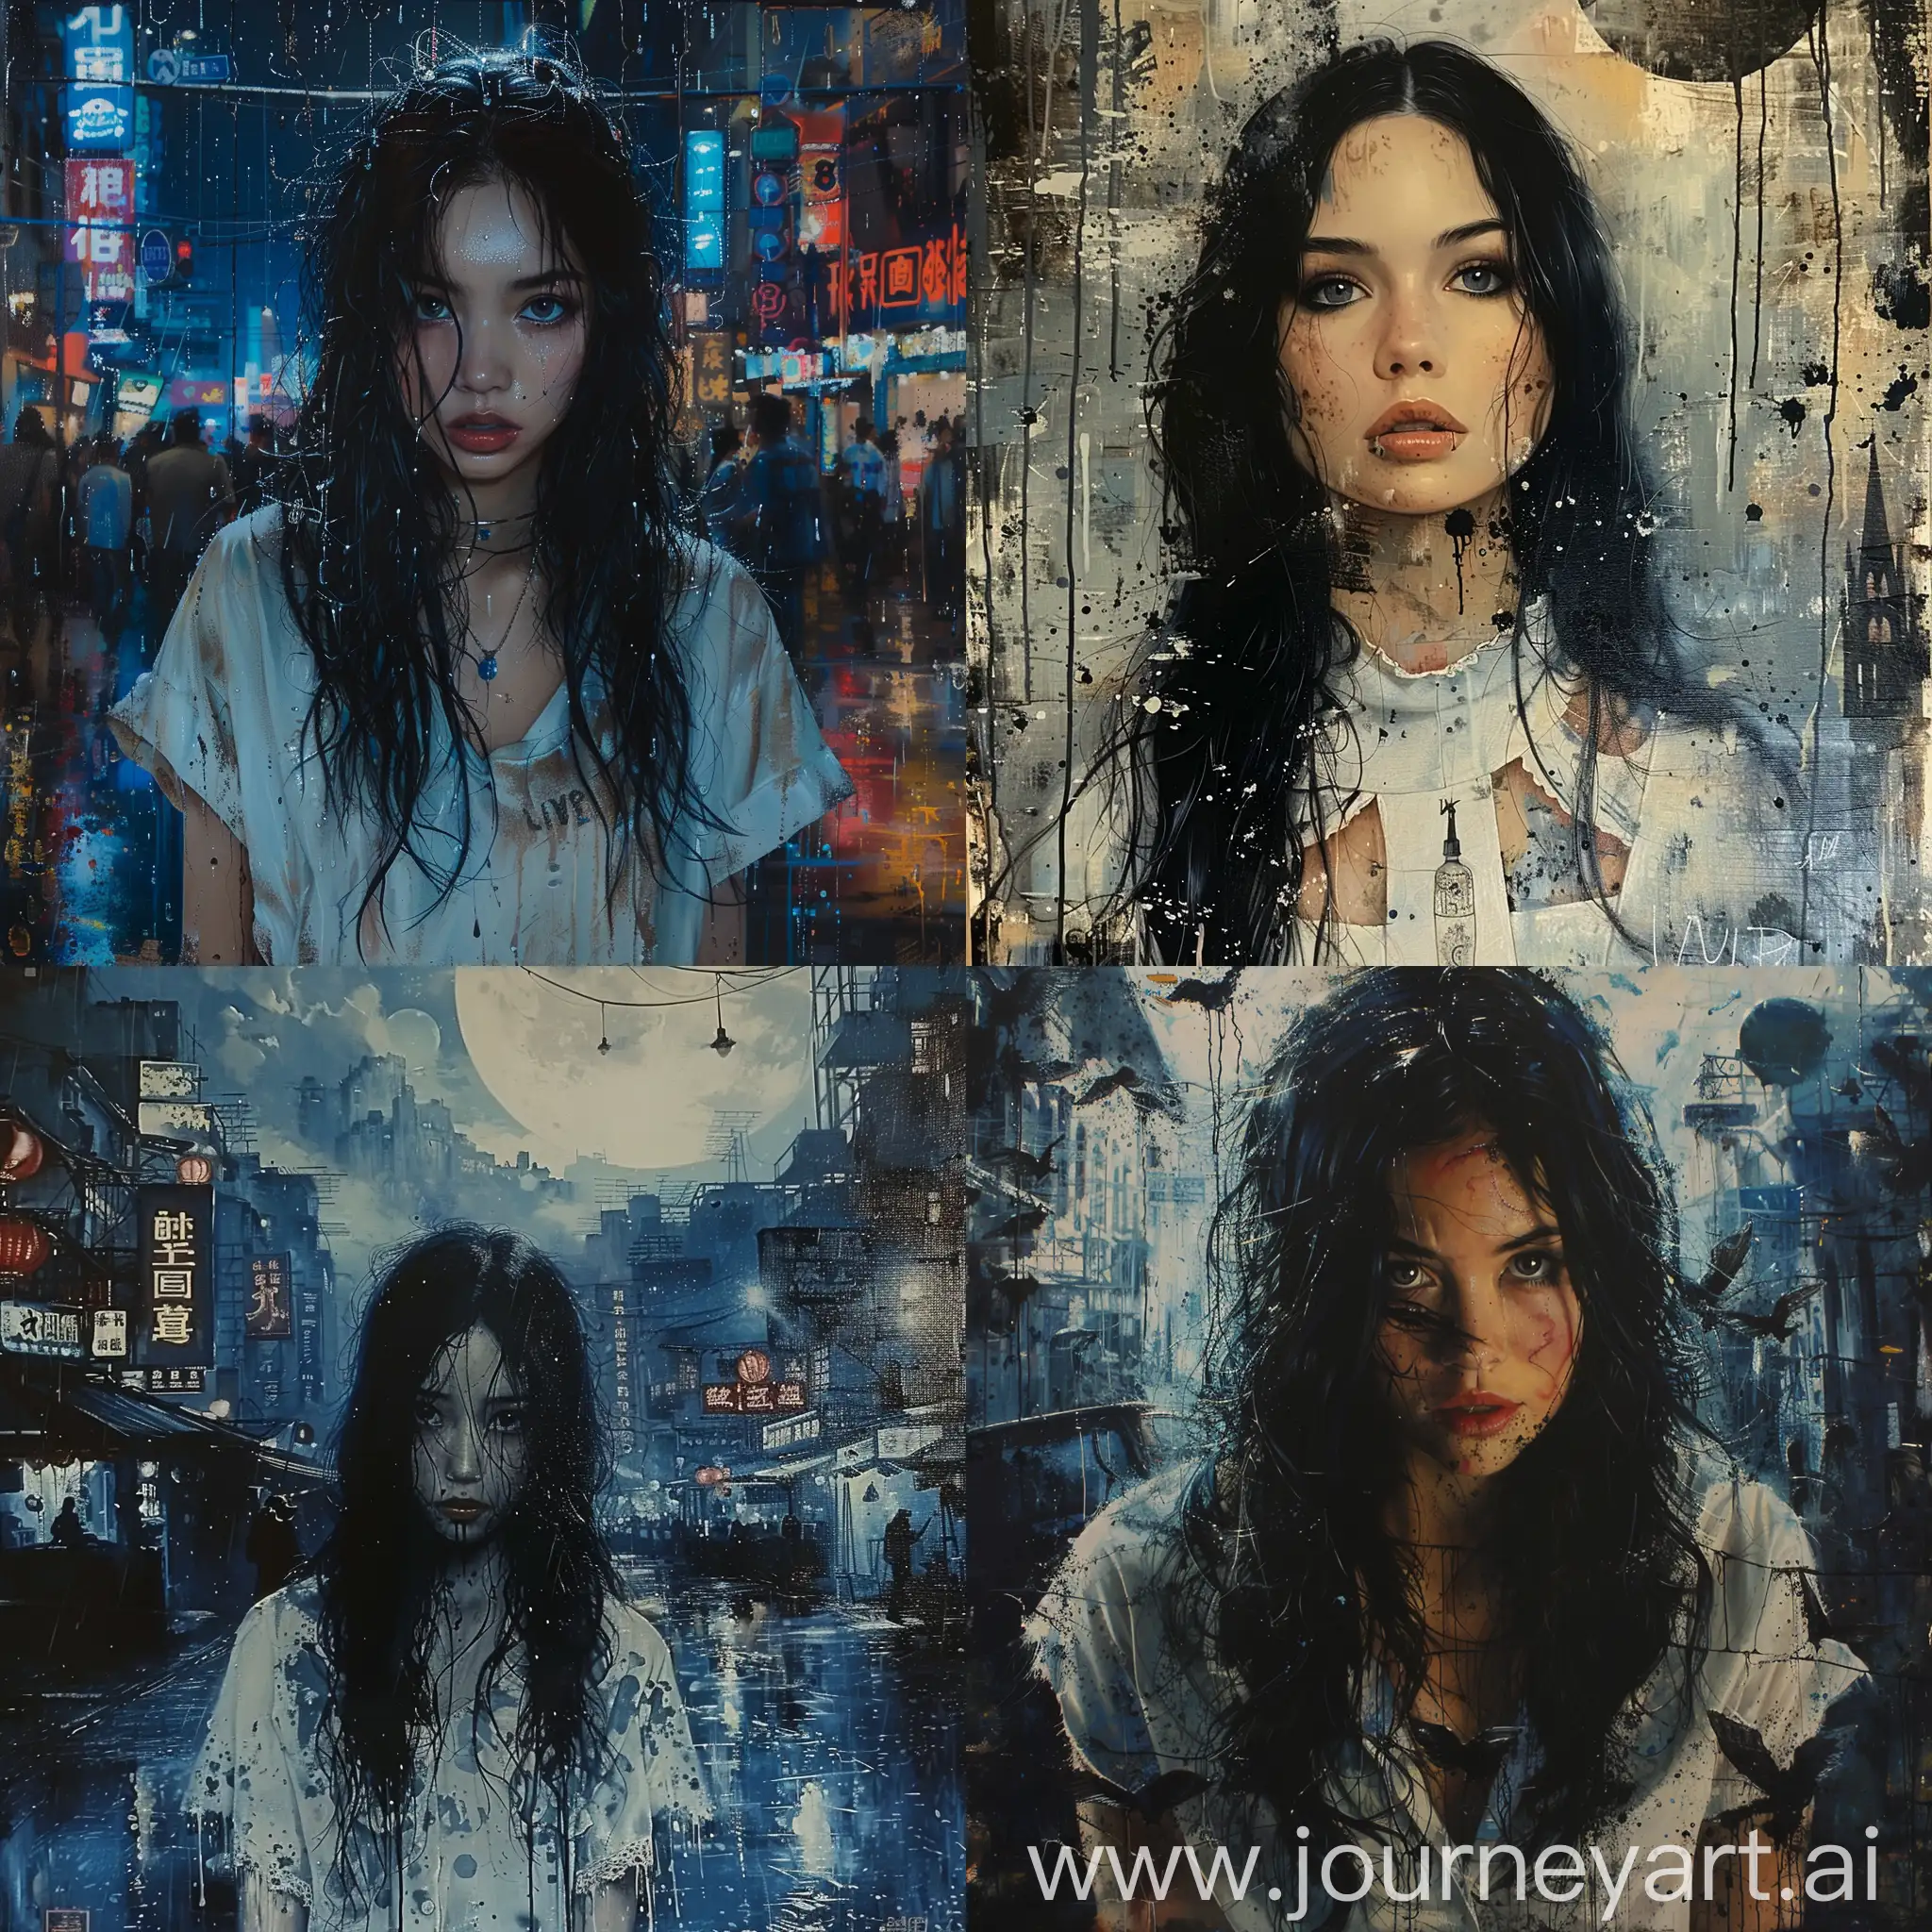 Surrealism::1.3 woman with white hospital gown, standing in in the middle of a city street at night with black and blue hues, the woman has long black hair and has bloodied bandages around her wrists, there is rain falling and her eyes are sapphire blue, --s 500